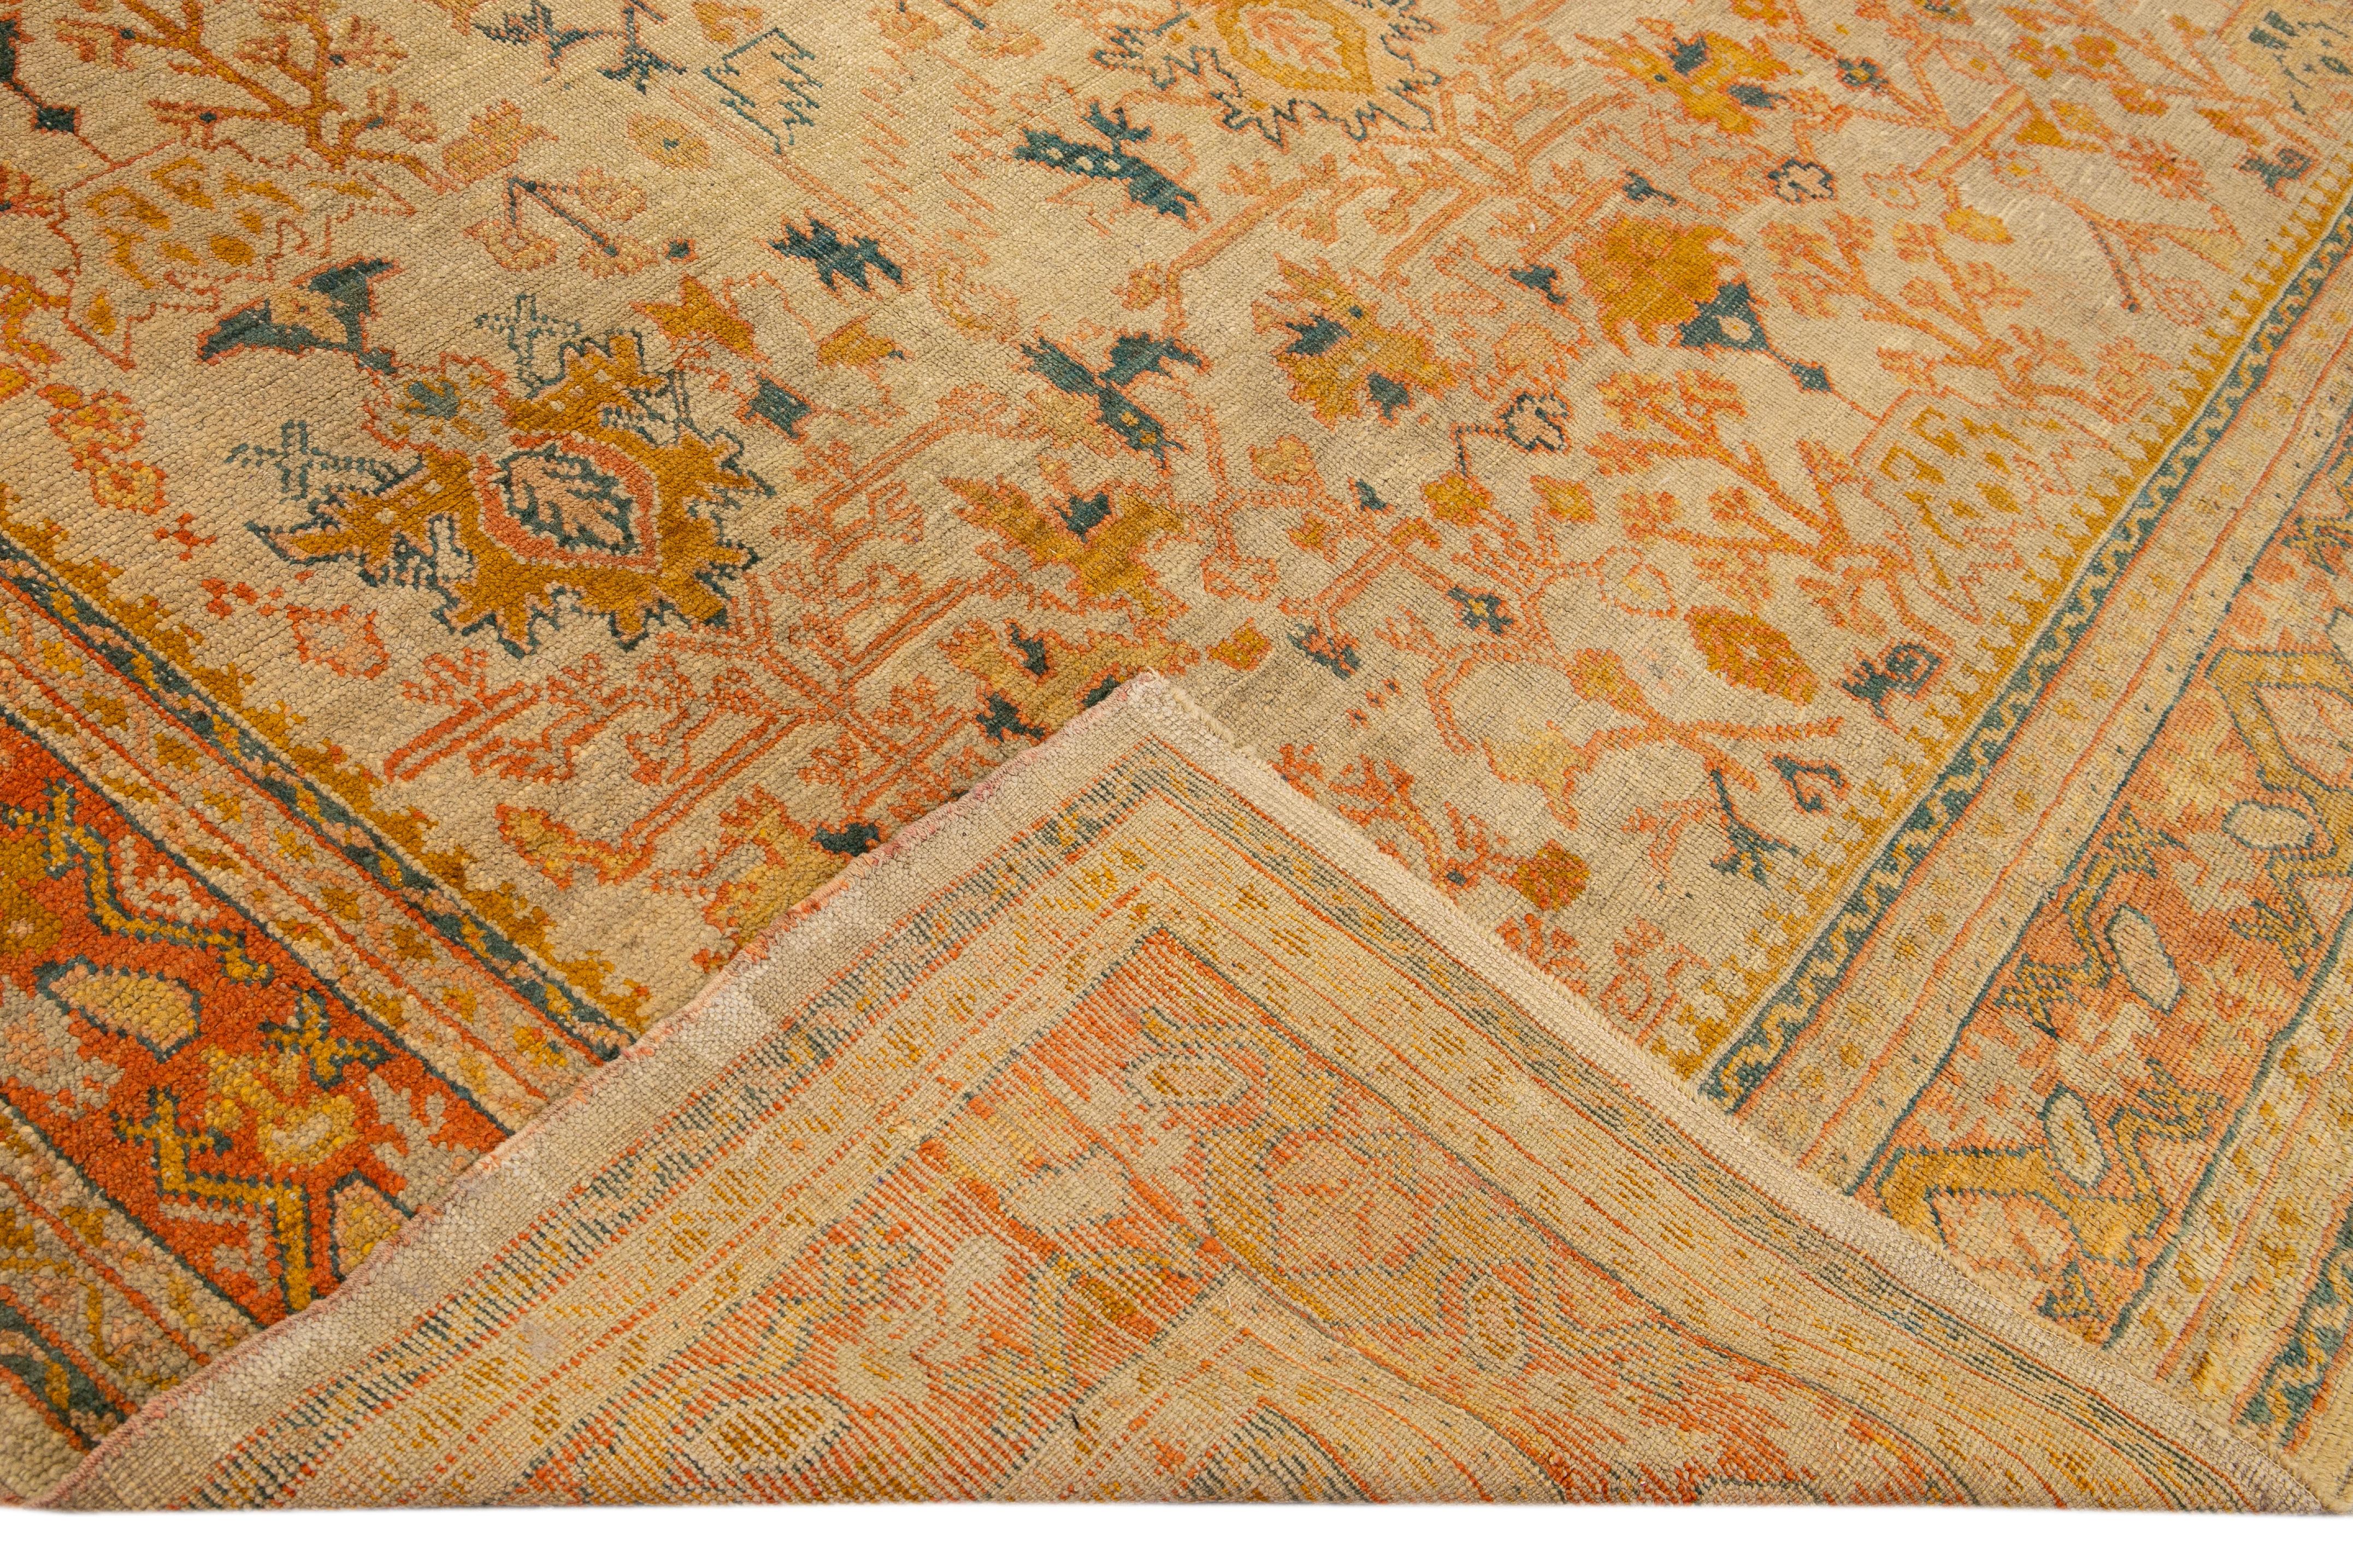 Beautiful vintage Turkish hand-knotted wool rug with a beige field. This rug has accents of orange and peach in a gorgeous all-over geometric floral design,

This rug measures: 10'5